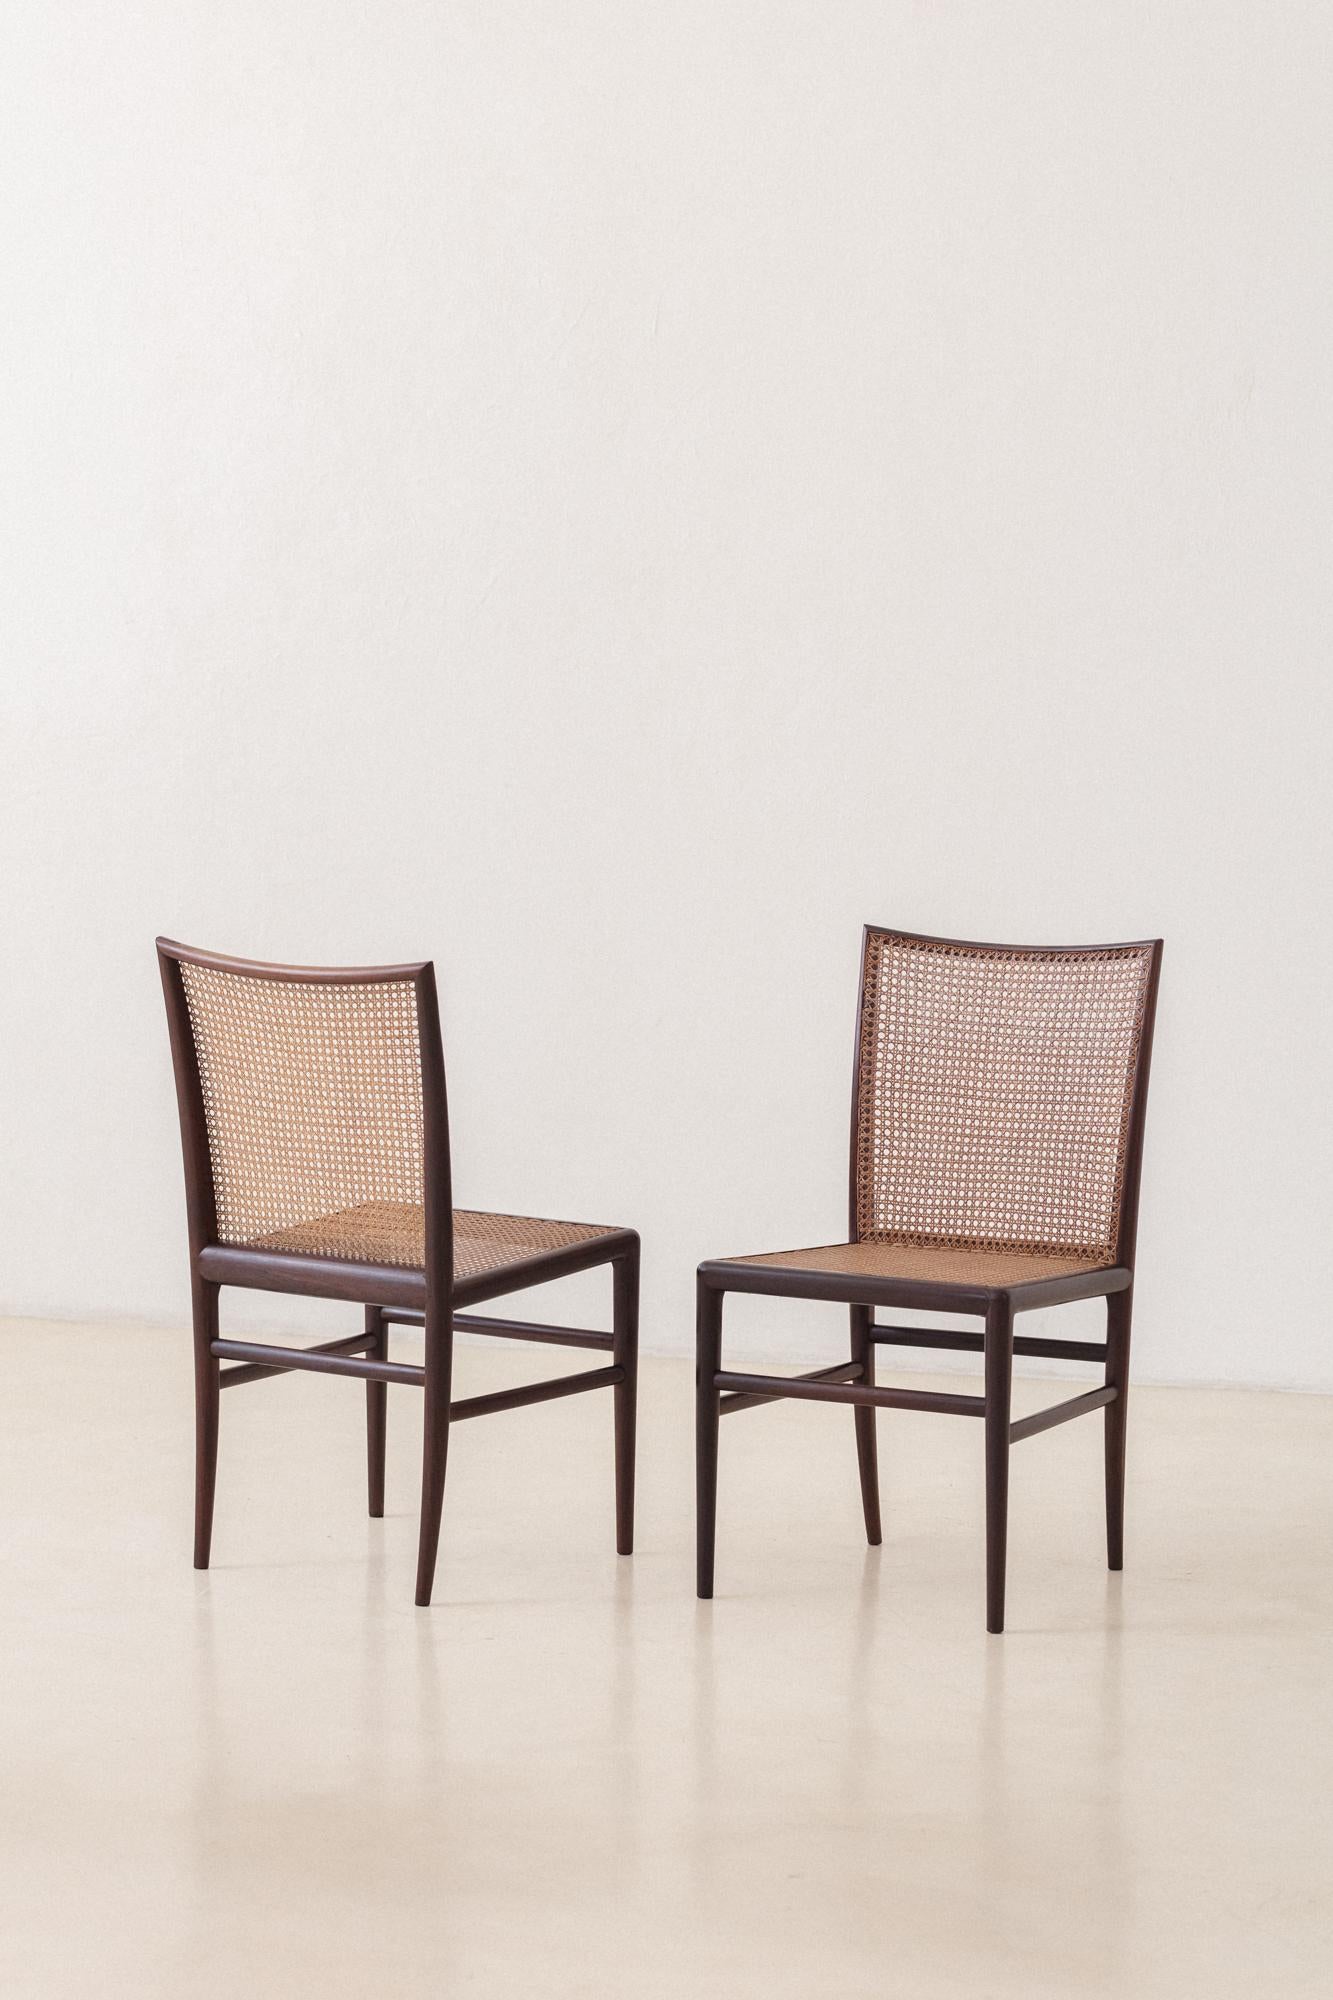 Mid-20th Century Set of 8 Rosewood Cane Chairs, Branco & Preto, 1952, Brazilian Midcentury For Sale